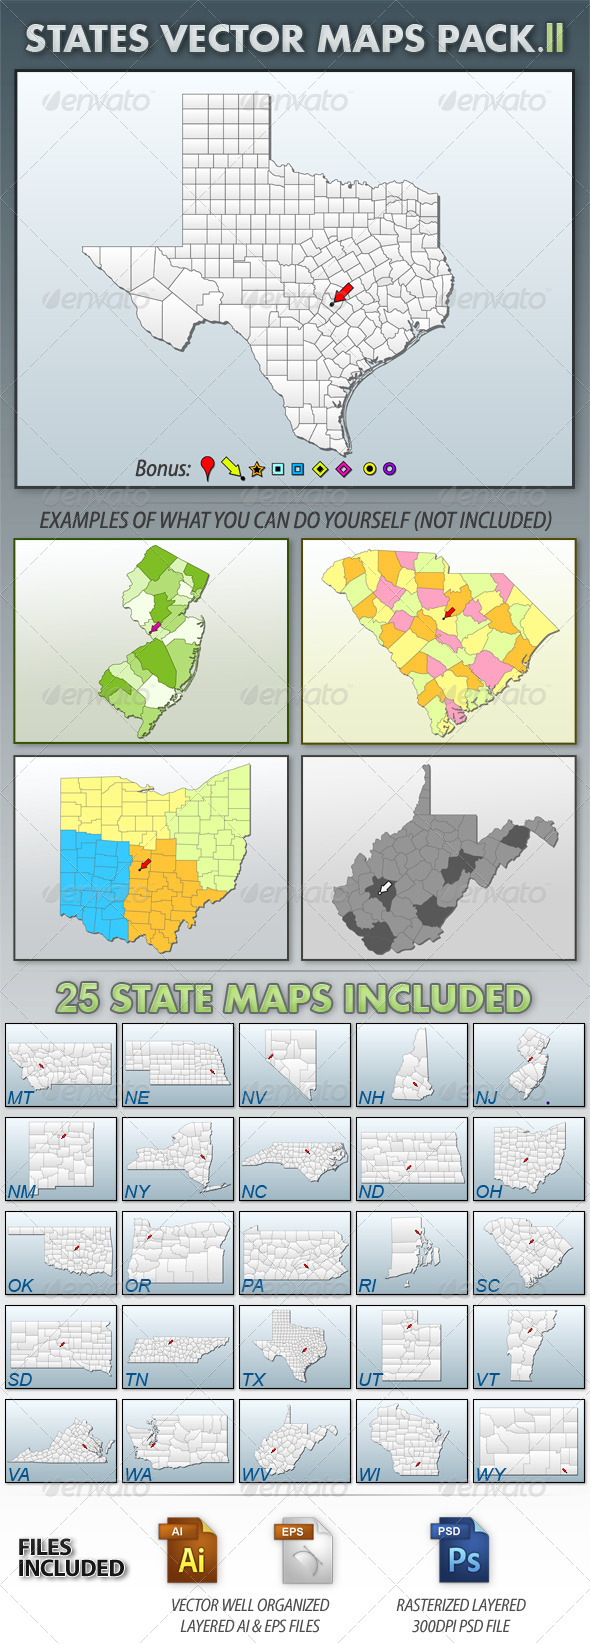 United States Vector Maps Pack II